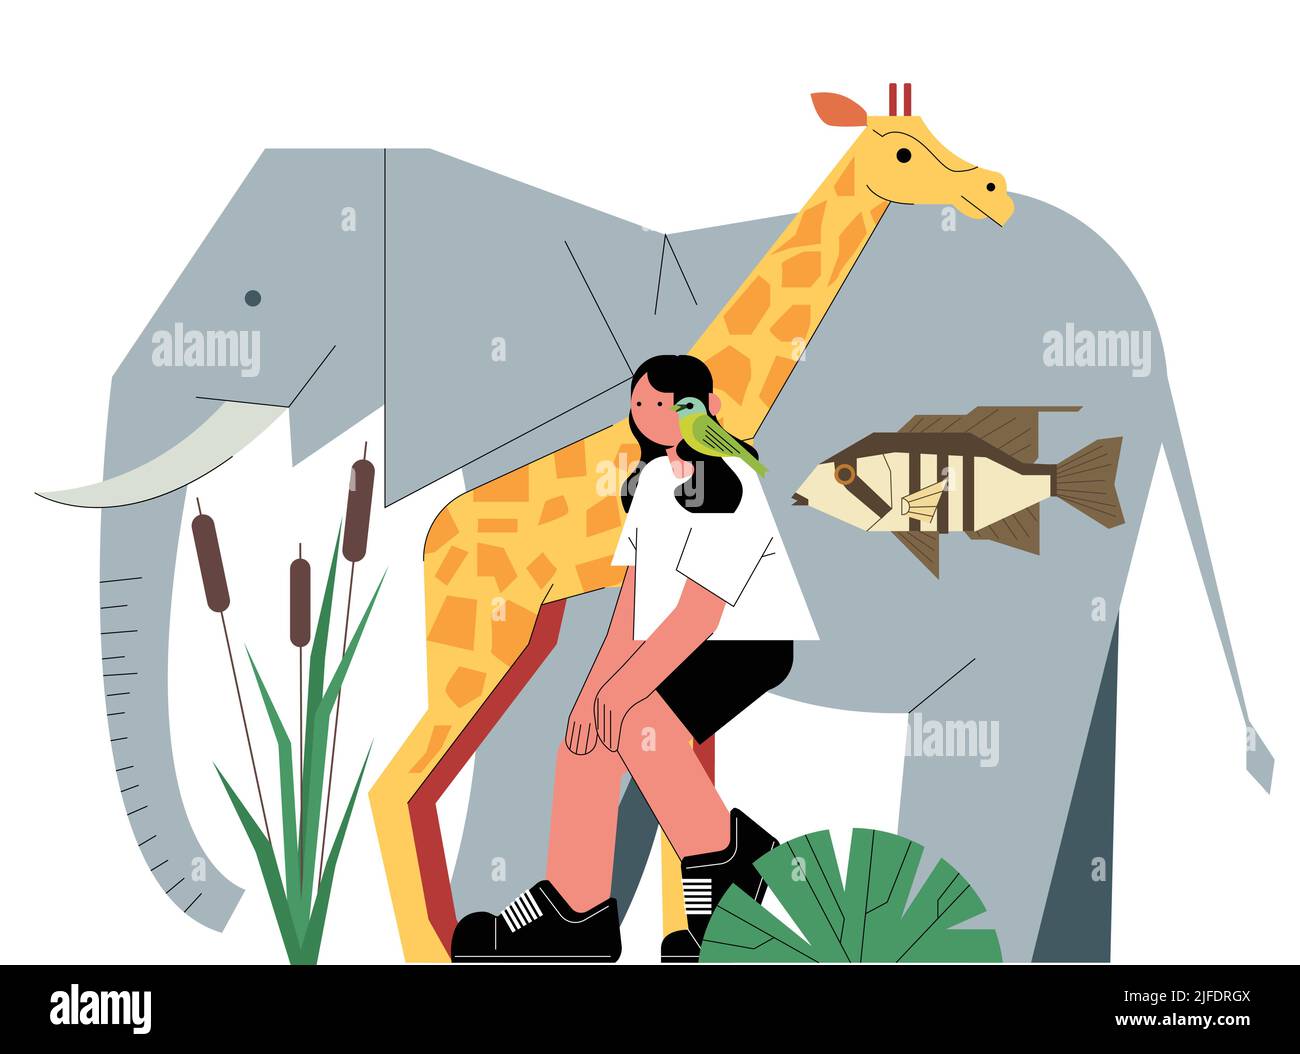 A vector illustration of cartoon animals, girl and plants on white background Stock Vector